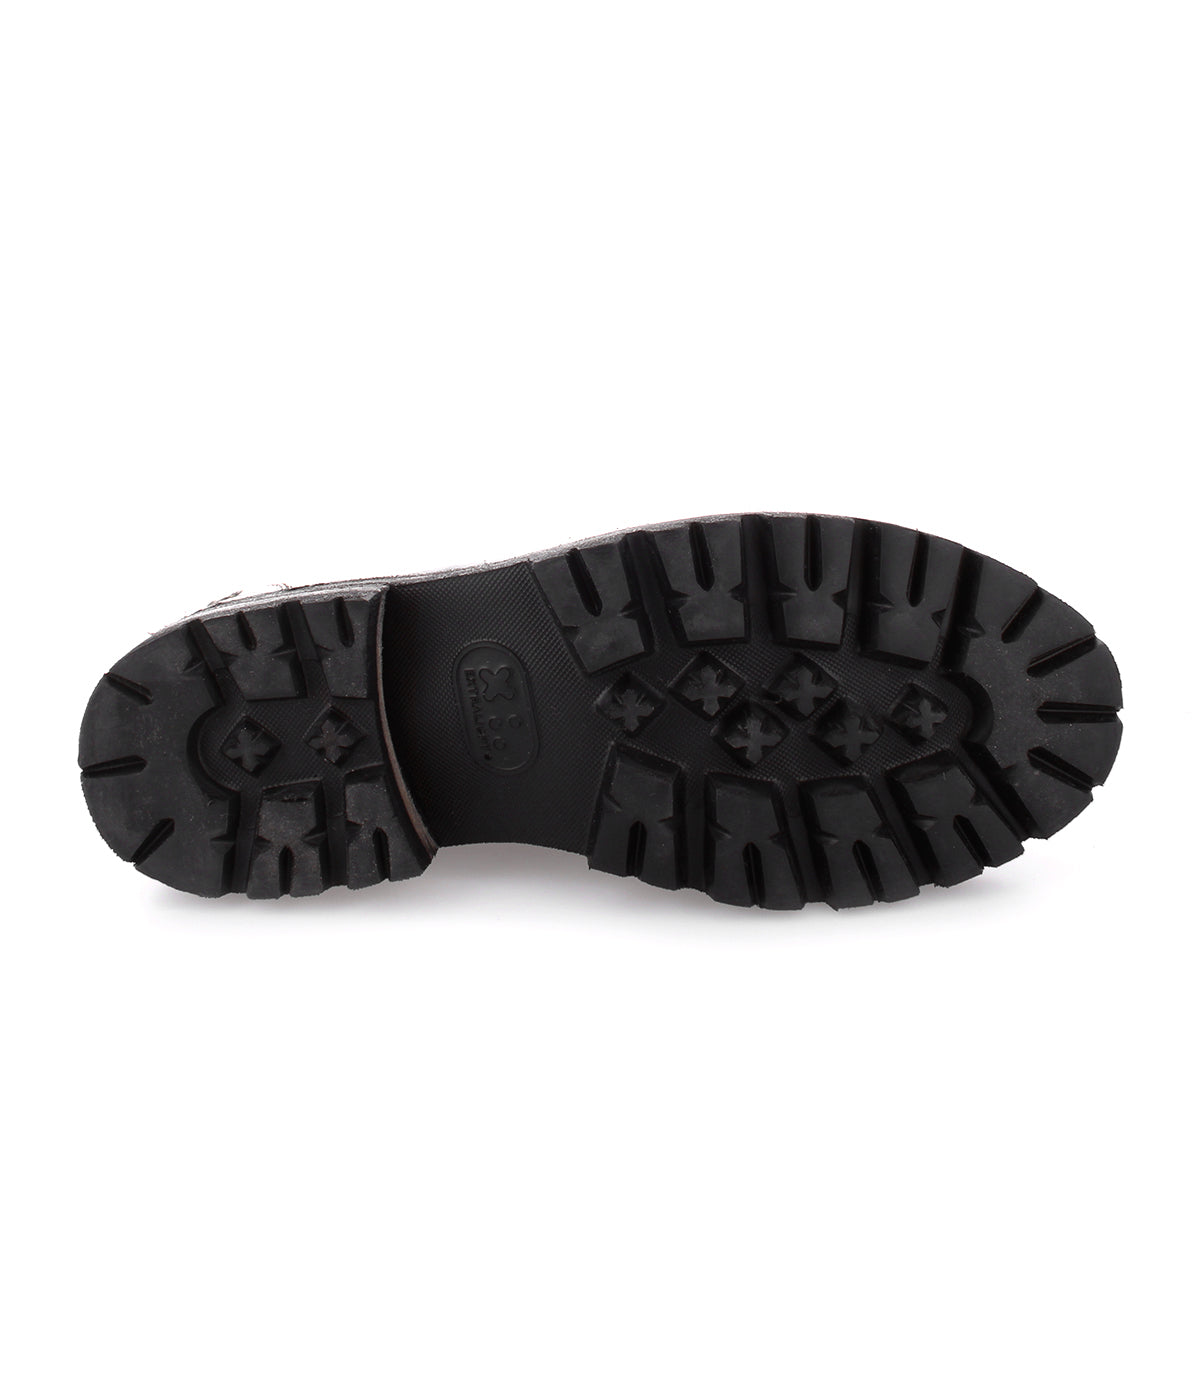 The sole of a Reina III shoe by Bed Stu on a white background.